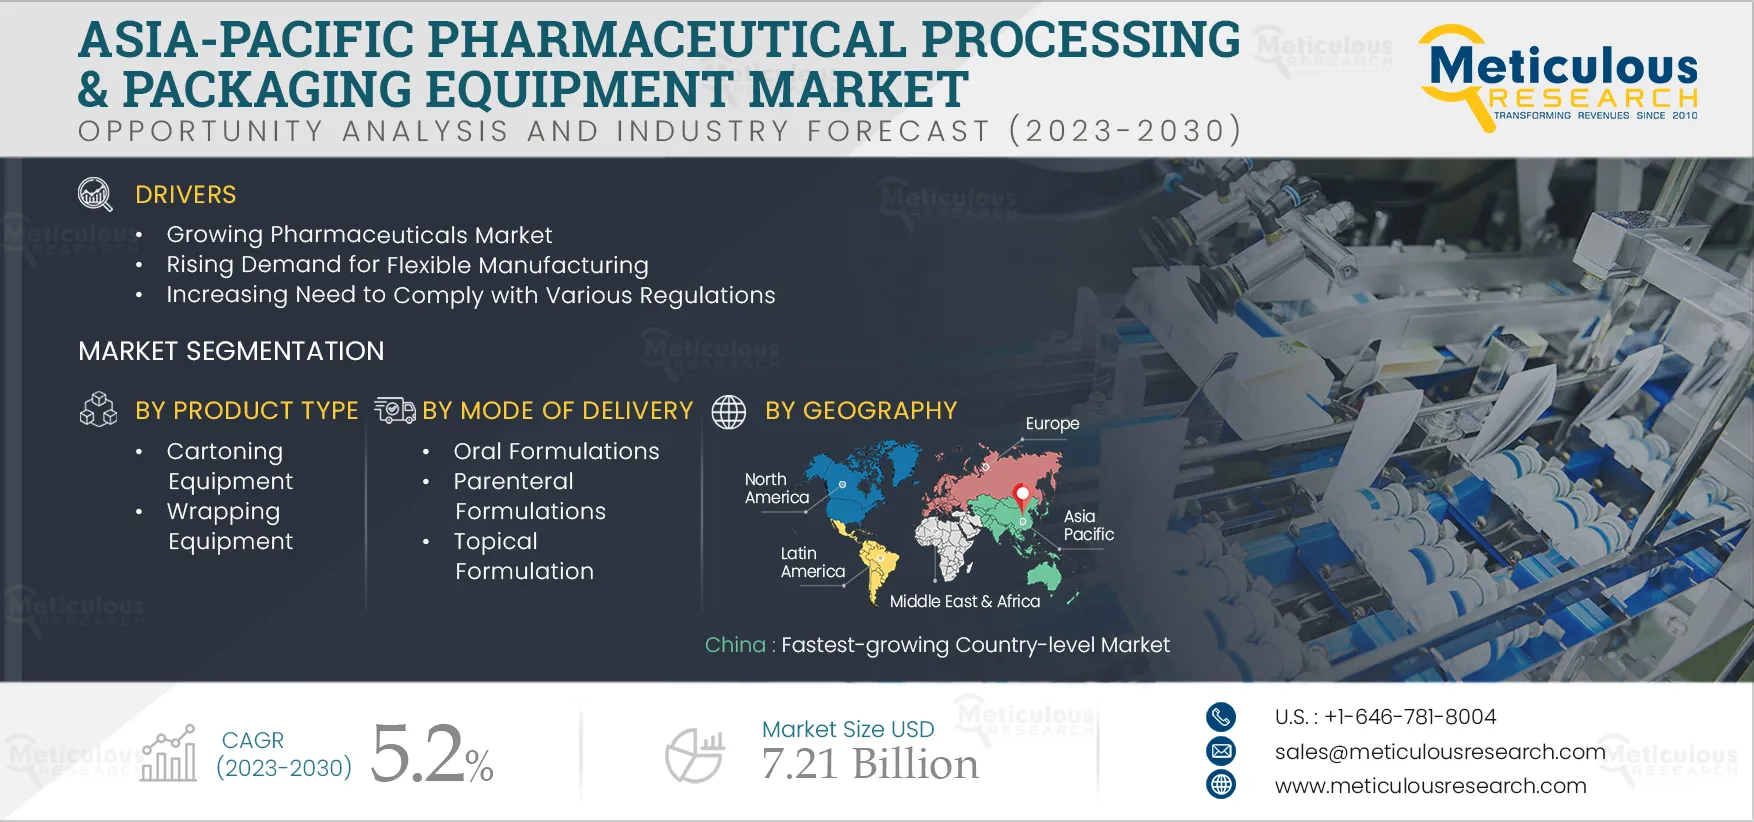 Asia-Pacific Pharmaceutical Processing & Packaging Equipment Market